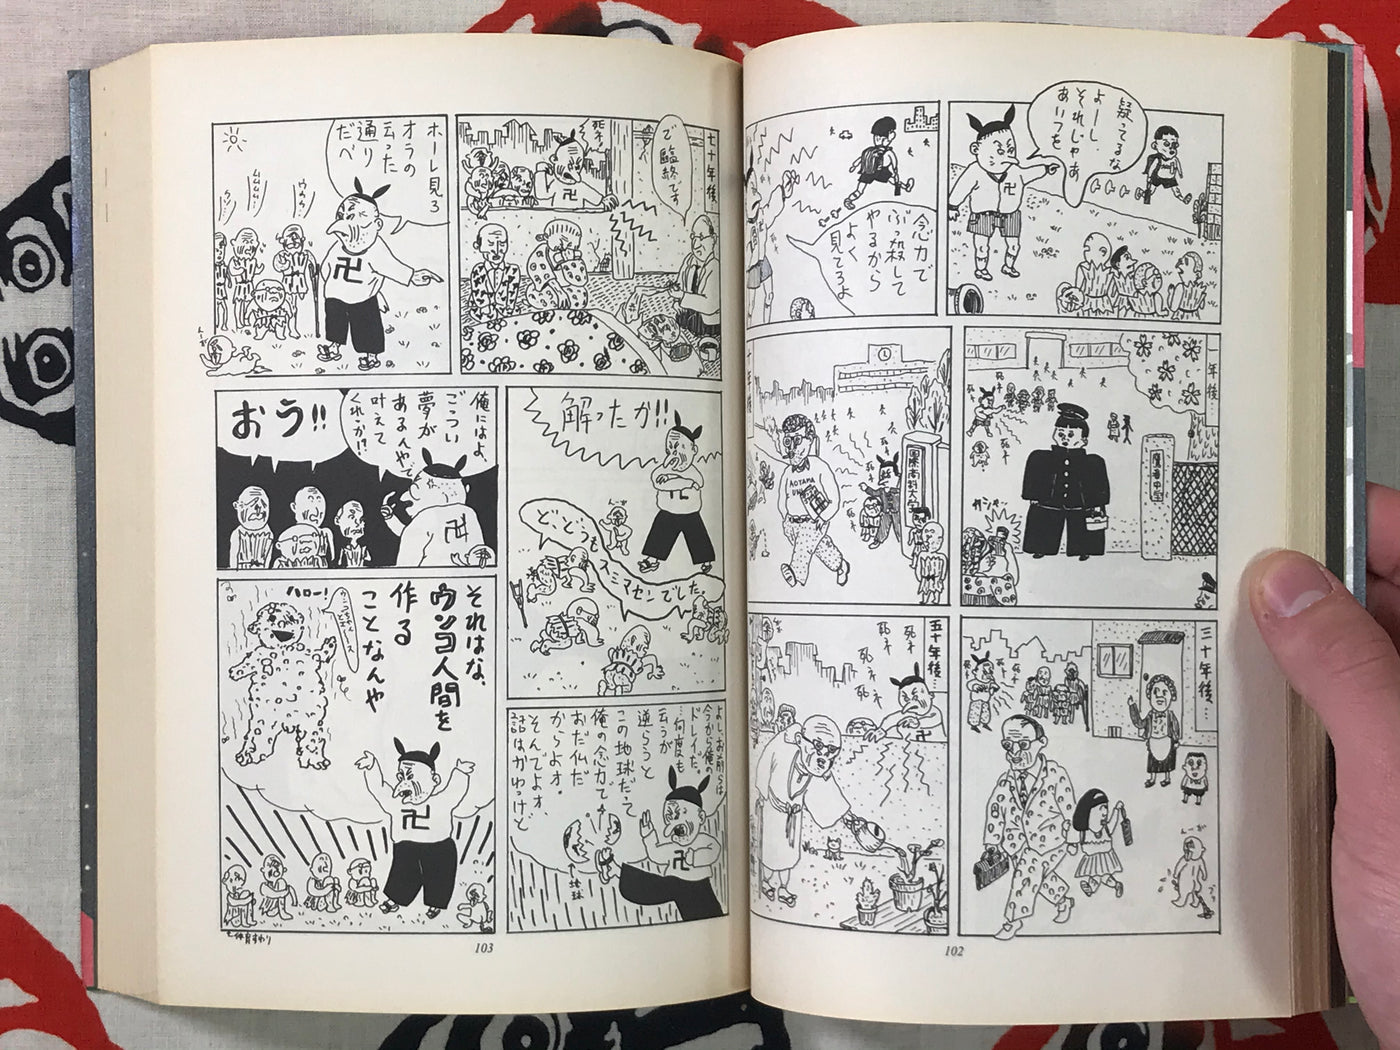 From the Pig Sty to the Dog House by Nemoto Takashi (1981-84)